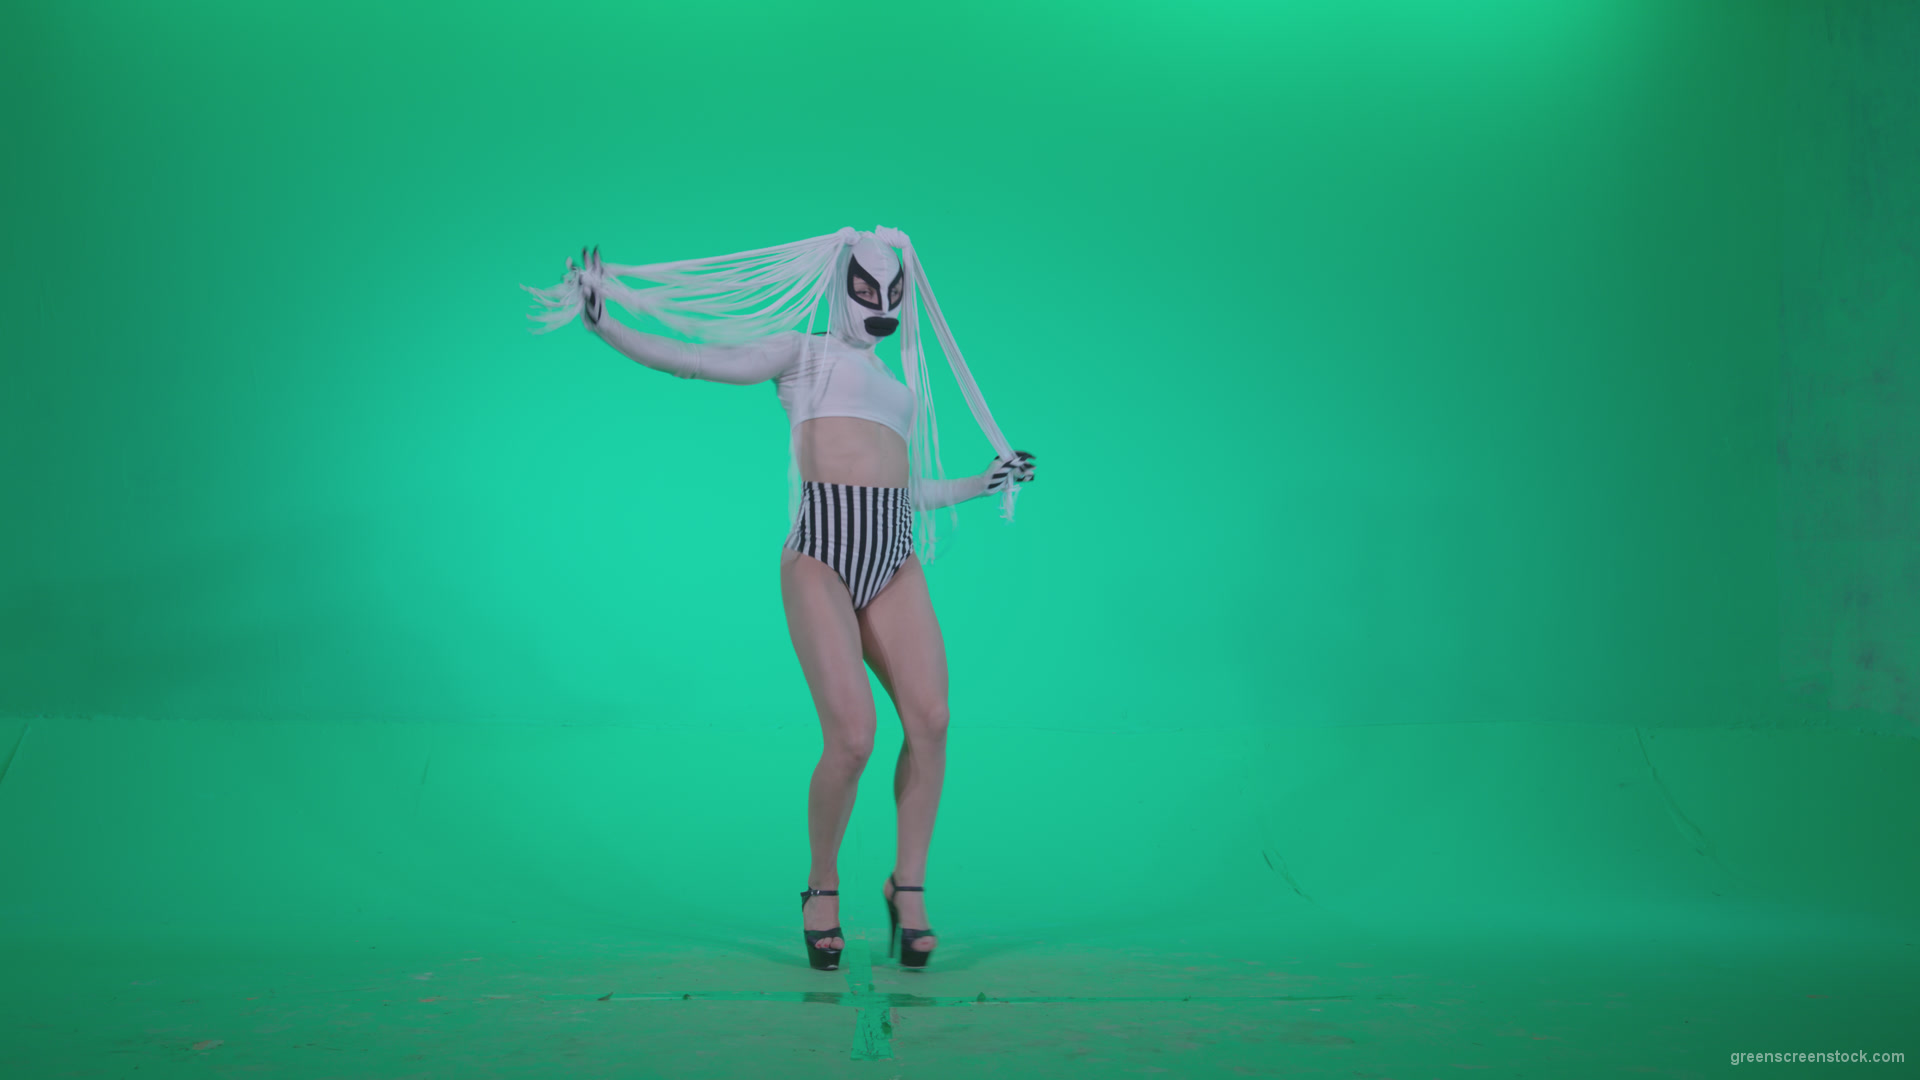 Go-go-Dancer-with-Latex-Top-t1-Green-Screen-Video-Footage_002 Green Screen Stock